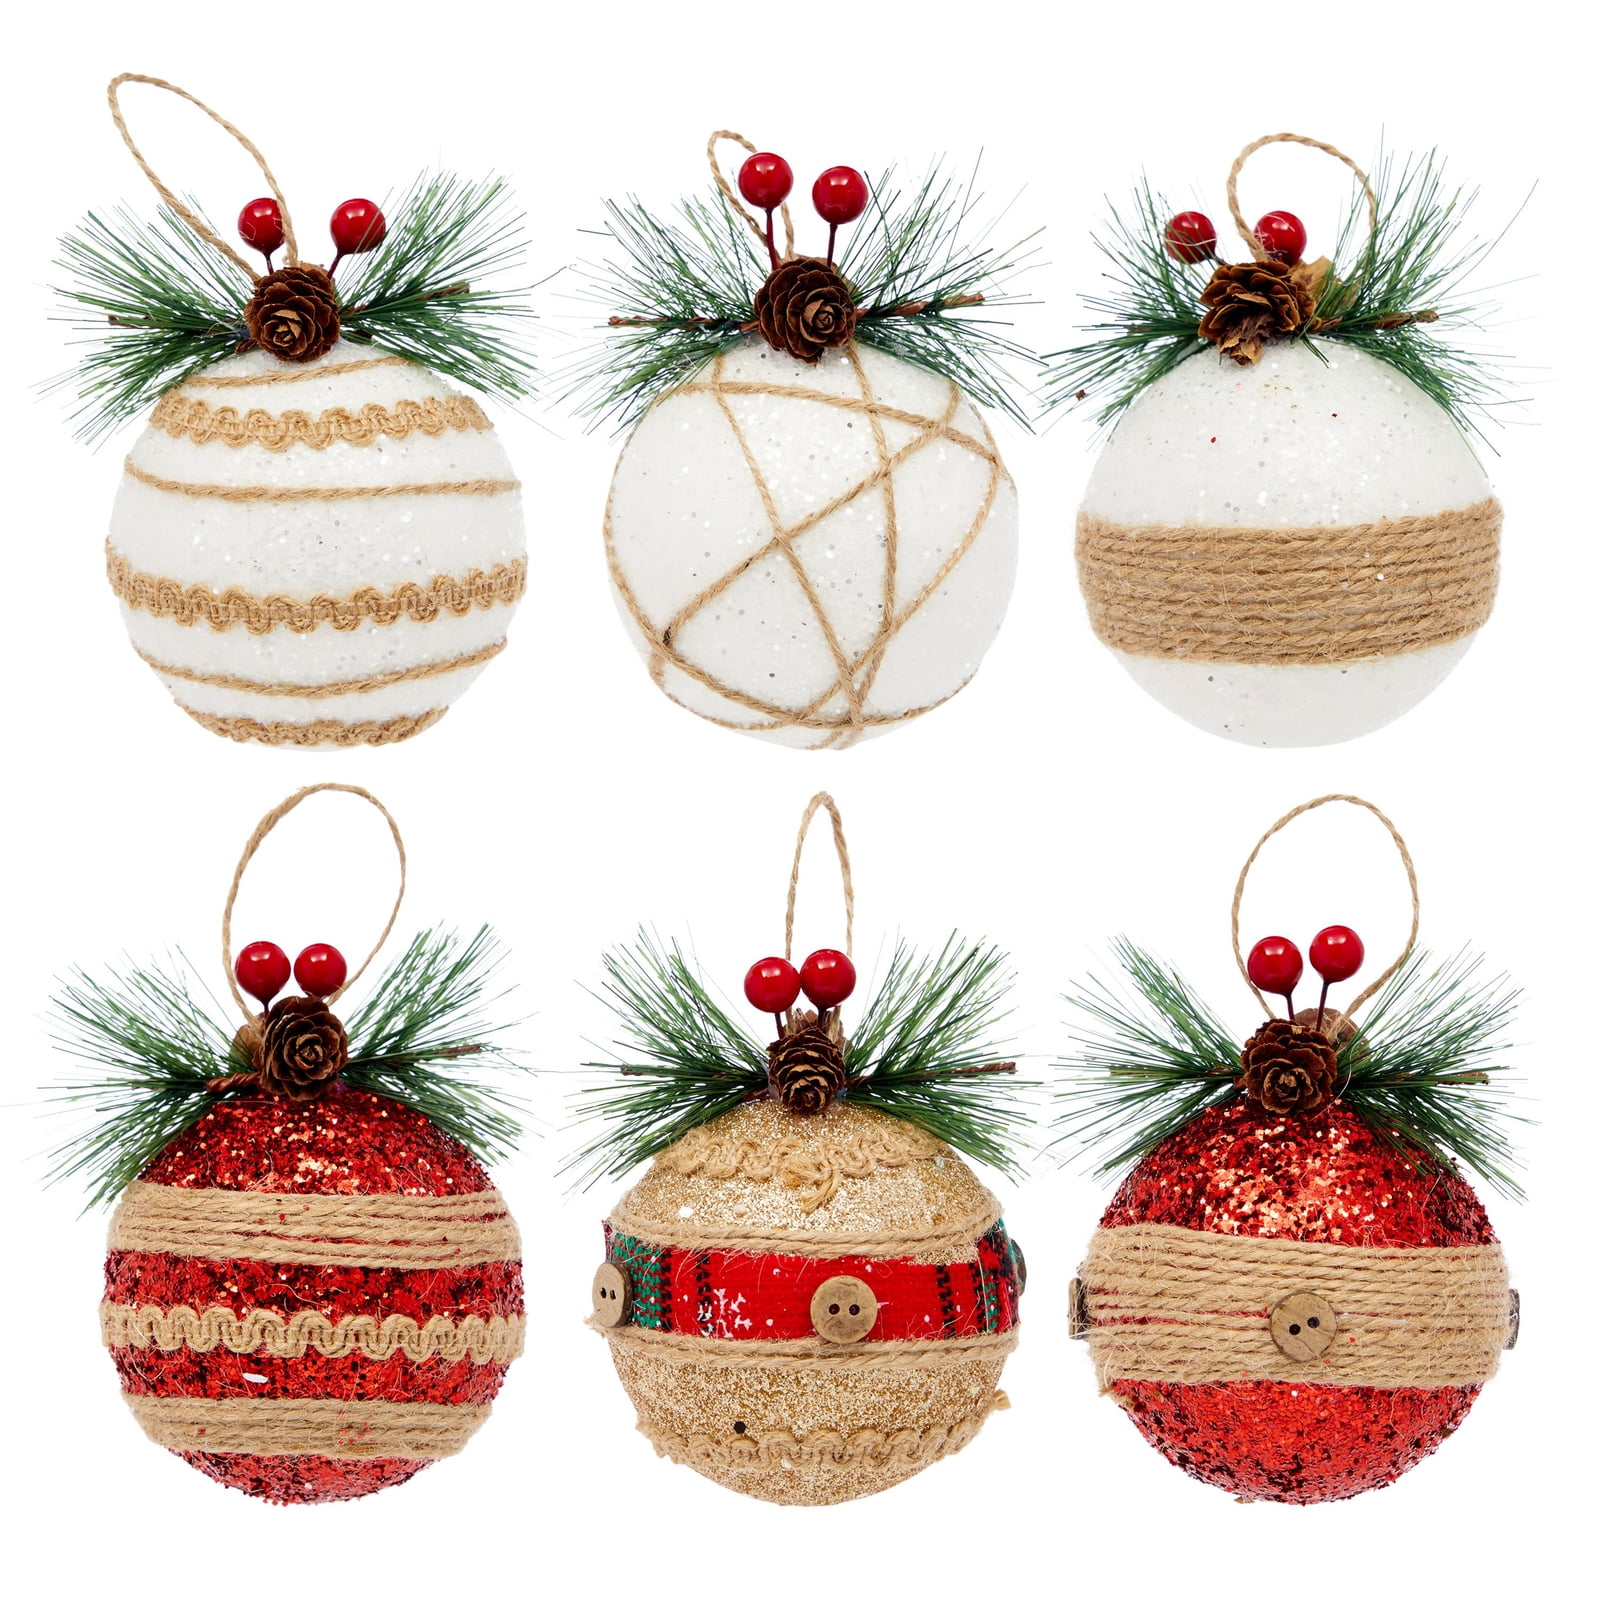 6PCS Assorted White Red Rustic Hanging Ball Ornaments New Years Decorations with Pine Cones Needles Xmas Decor Christmas Decorations Tree Ornaments Set